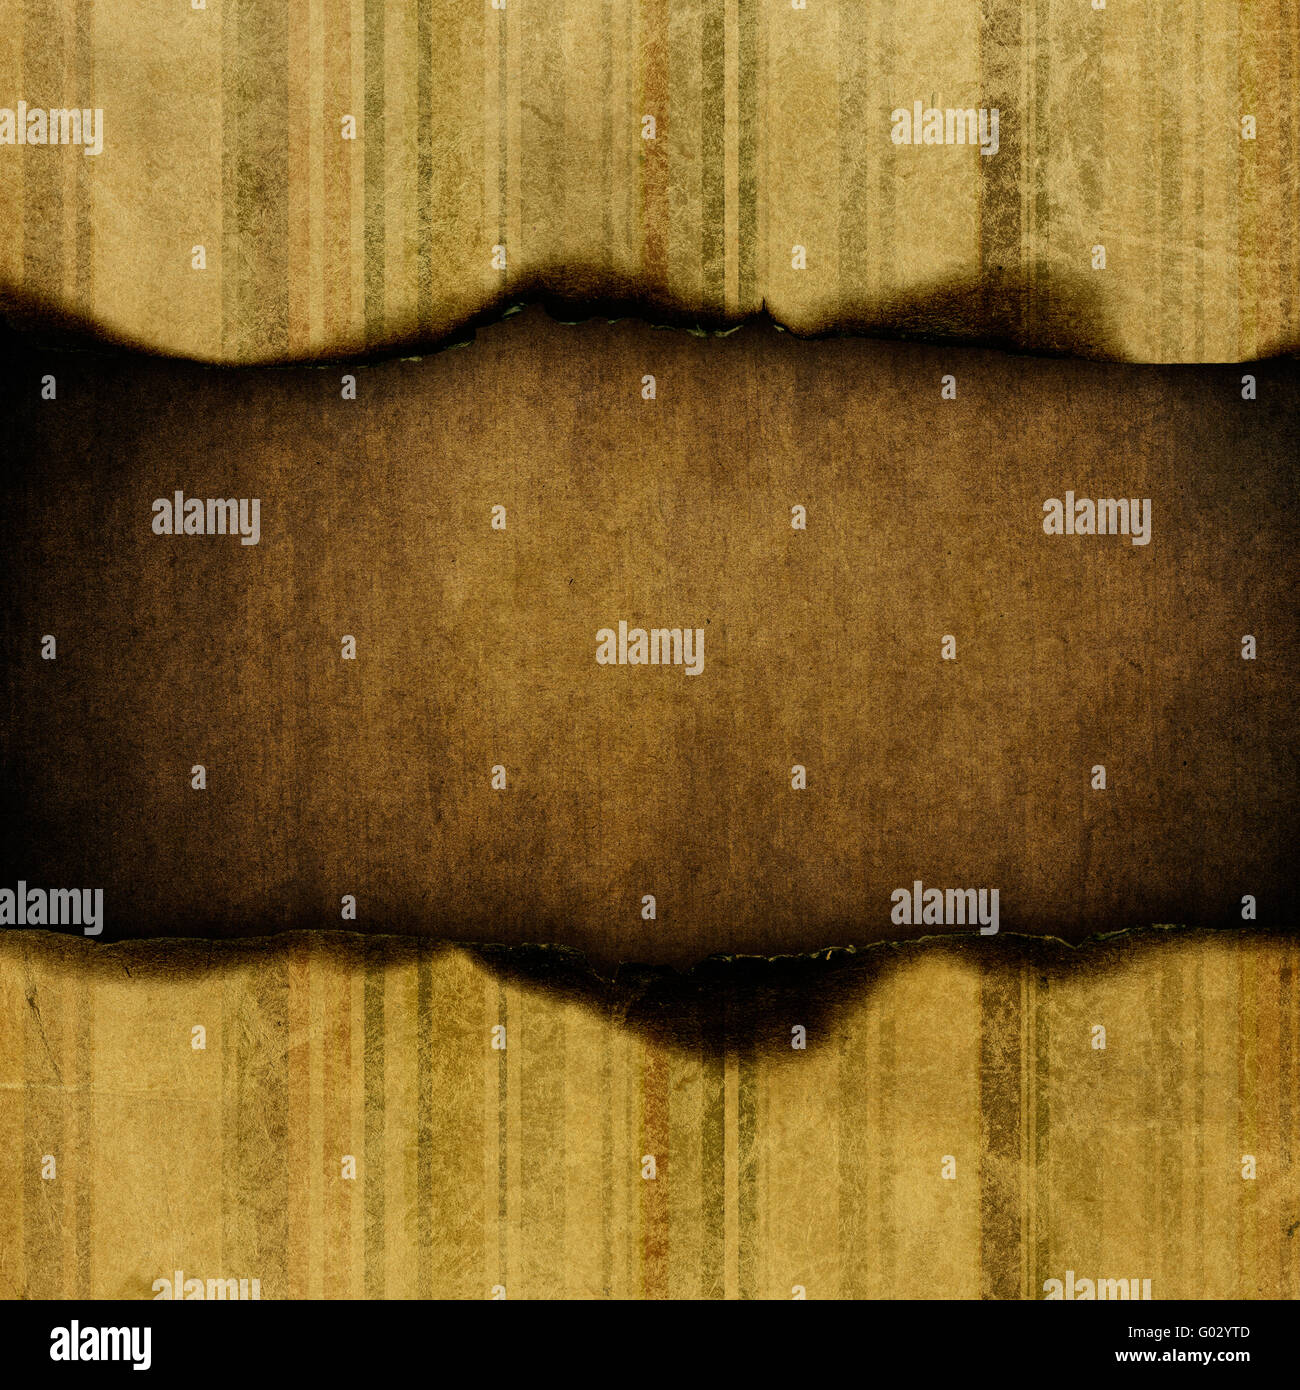 Grungy striped paper background, with space for text. Stock Photo